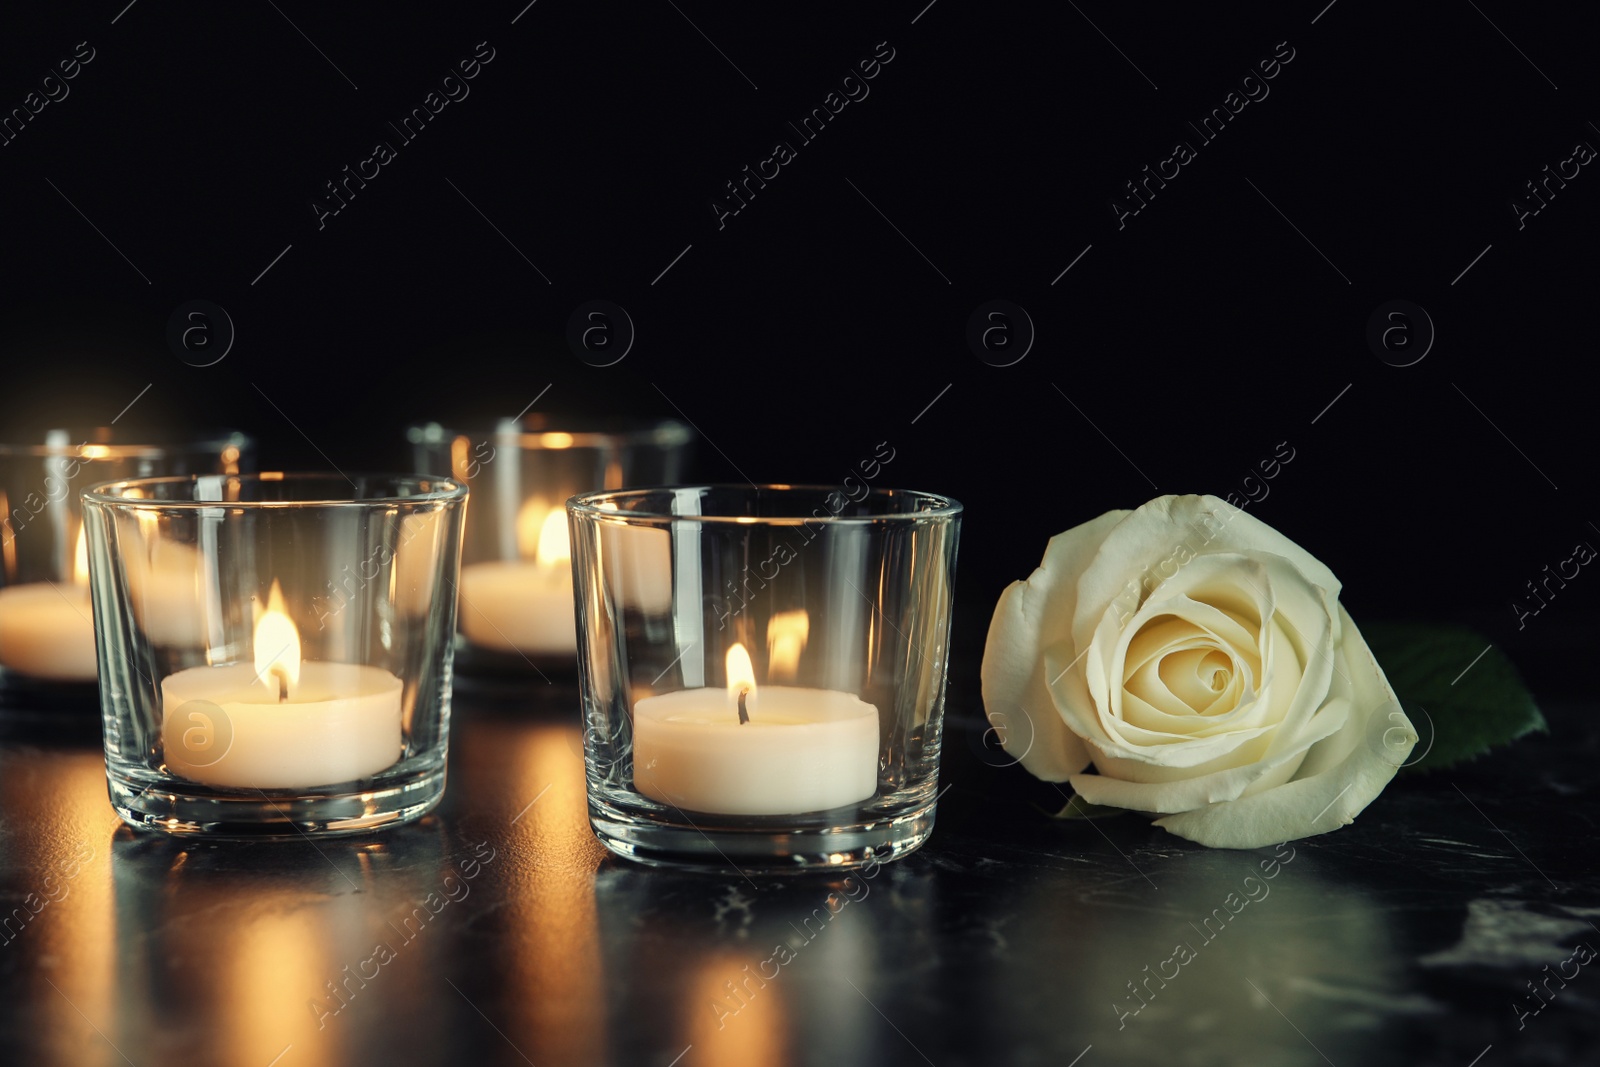 Photo of White rose and burning candles on table in darkness. Funeral symbol